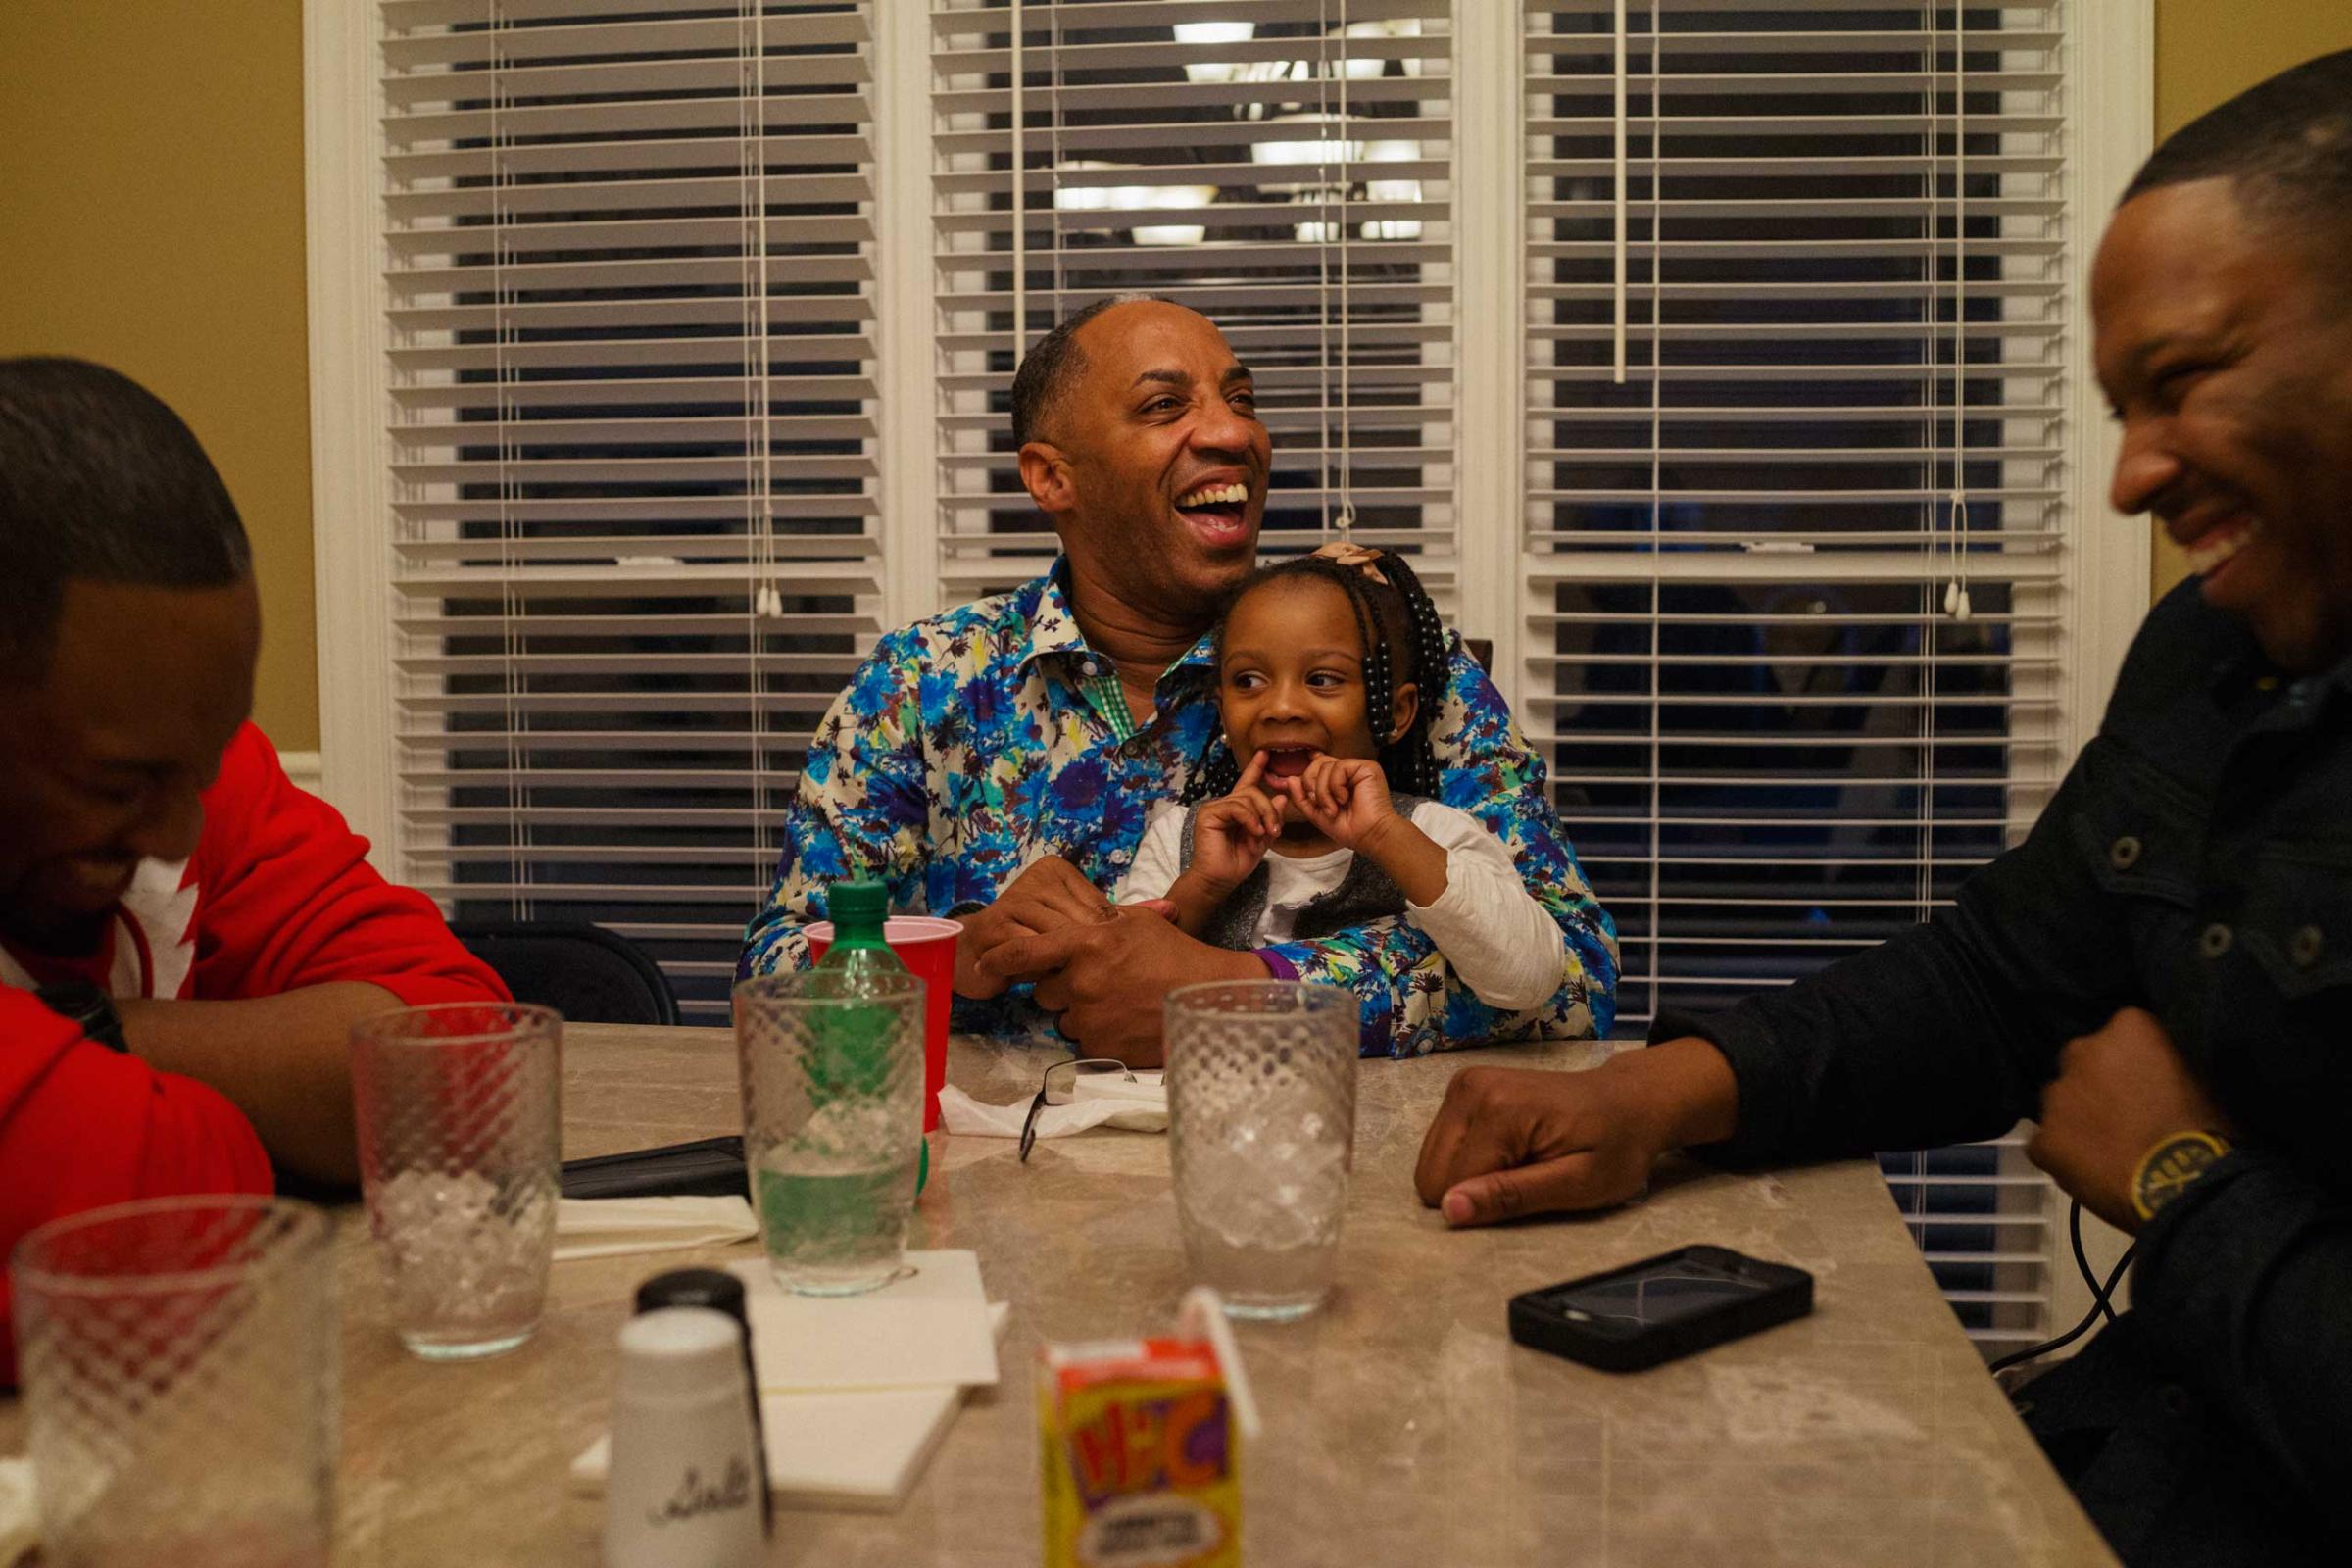 (L-R) Michael McClure Jr., Michael McClure Sr. and his granddaughter Brooklyn, and Darius McClure laugh during a lively family dinner at the home of Rev. Michael McClure Sr., in Birmingham, Ala. on March 22, 2015.